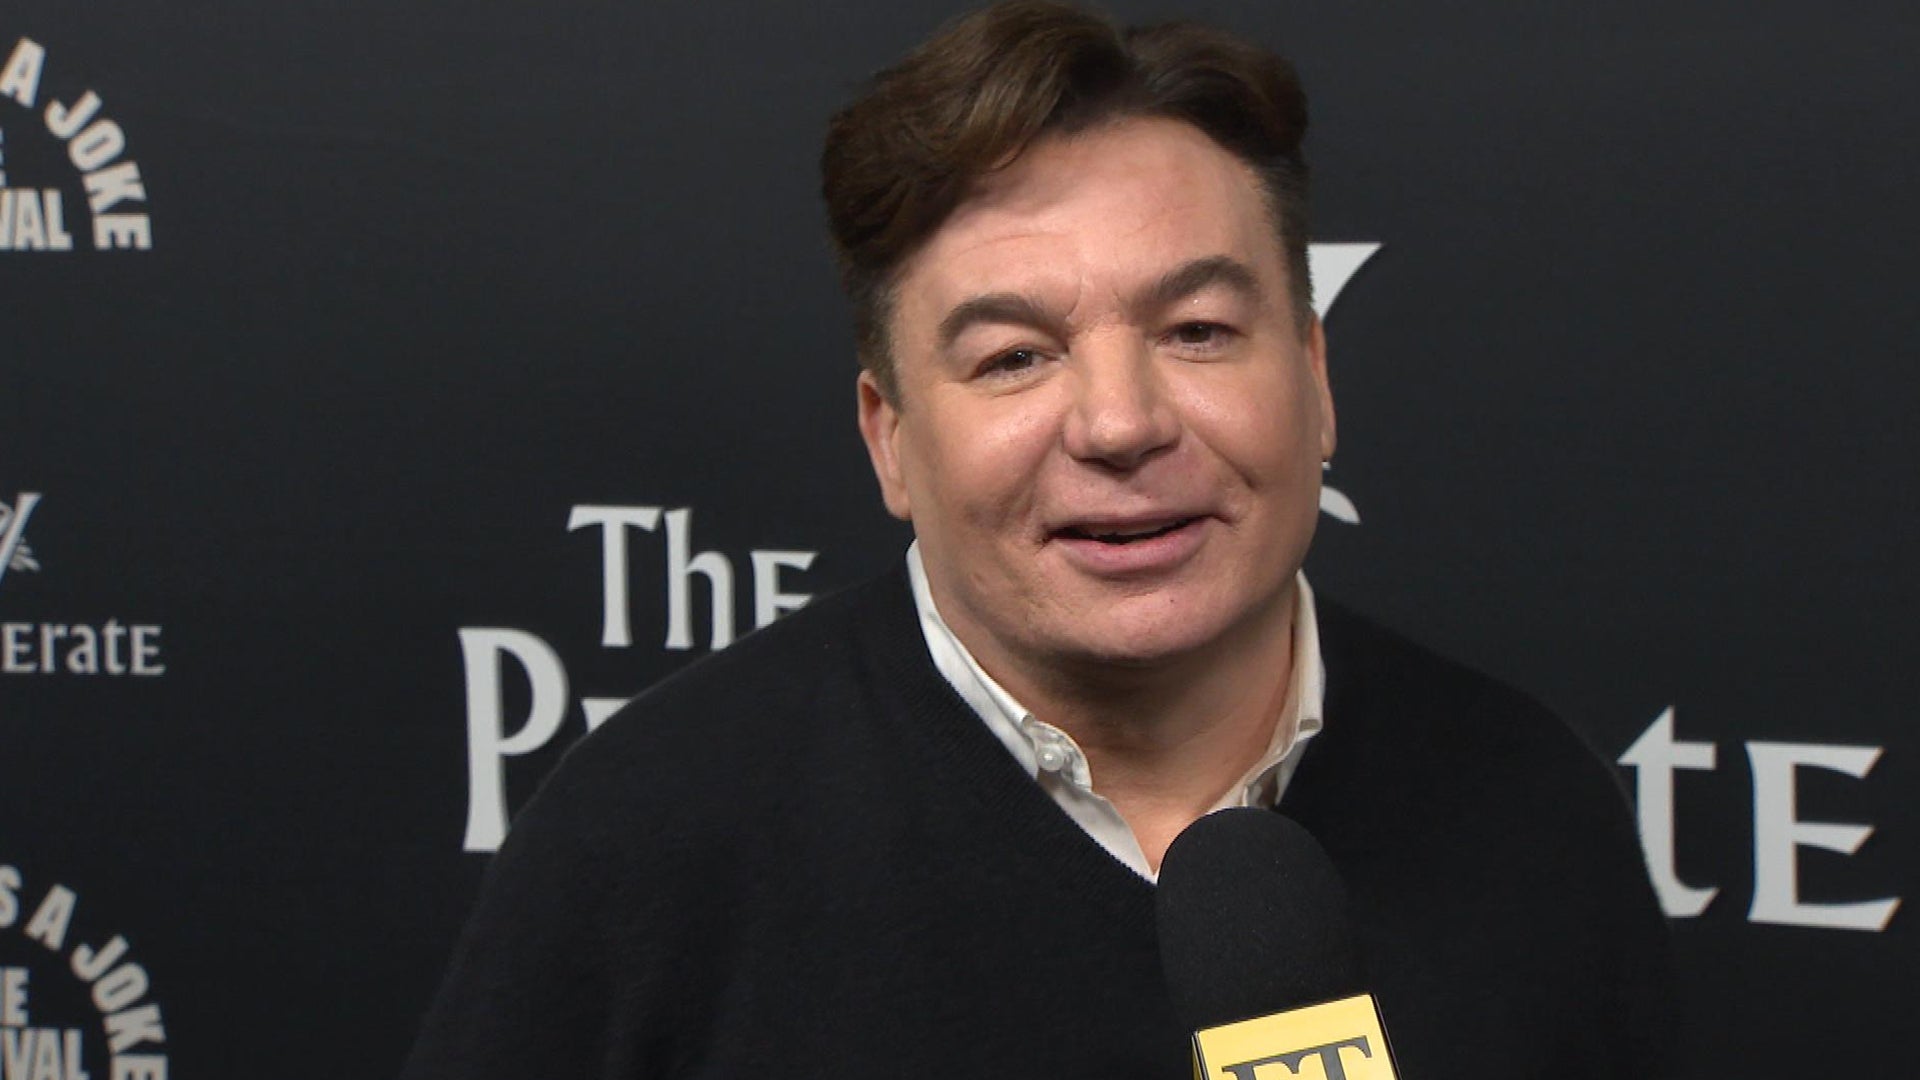 Mike Myers Shares How He Manages to Play 8 Characters in ’The Pentaverate’ (Exclusive)